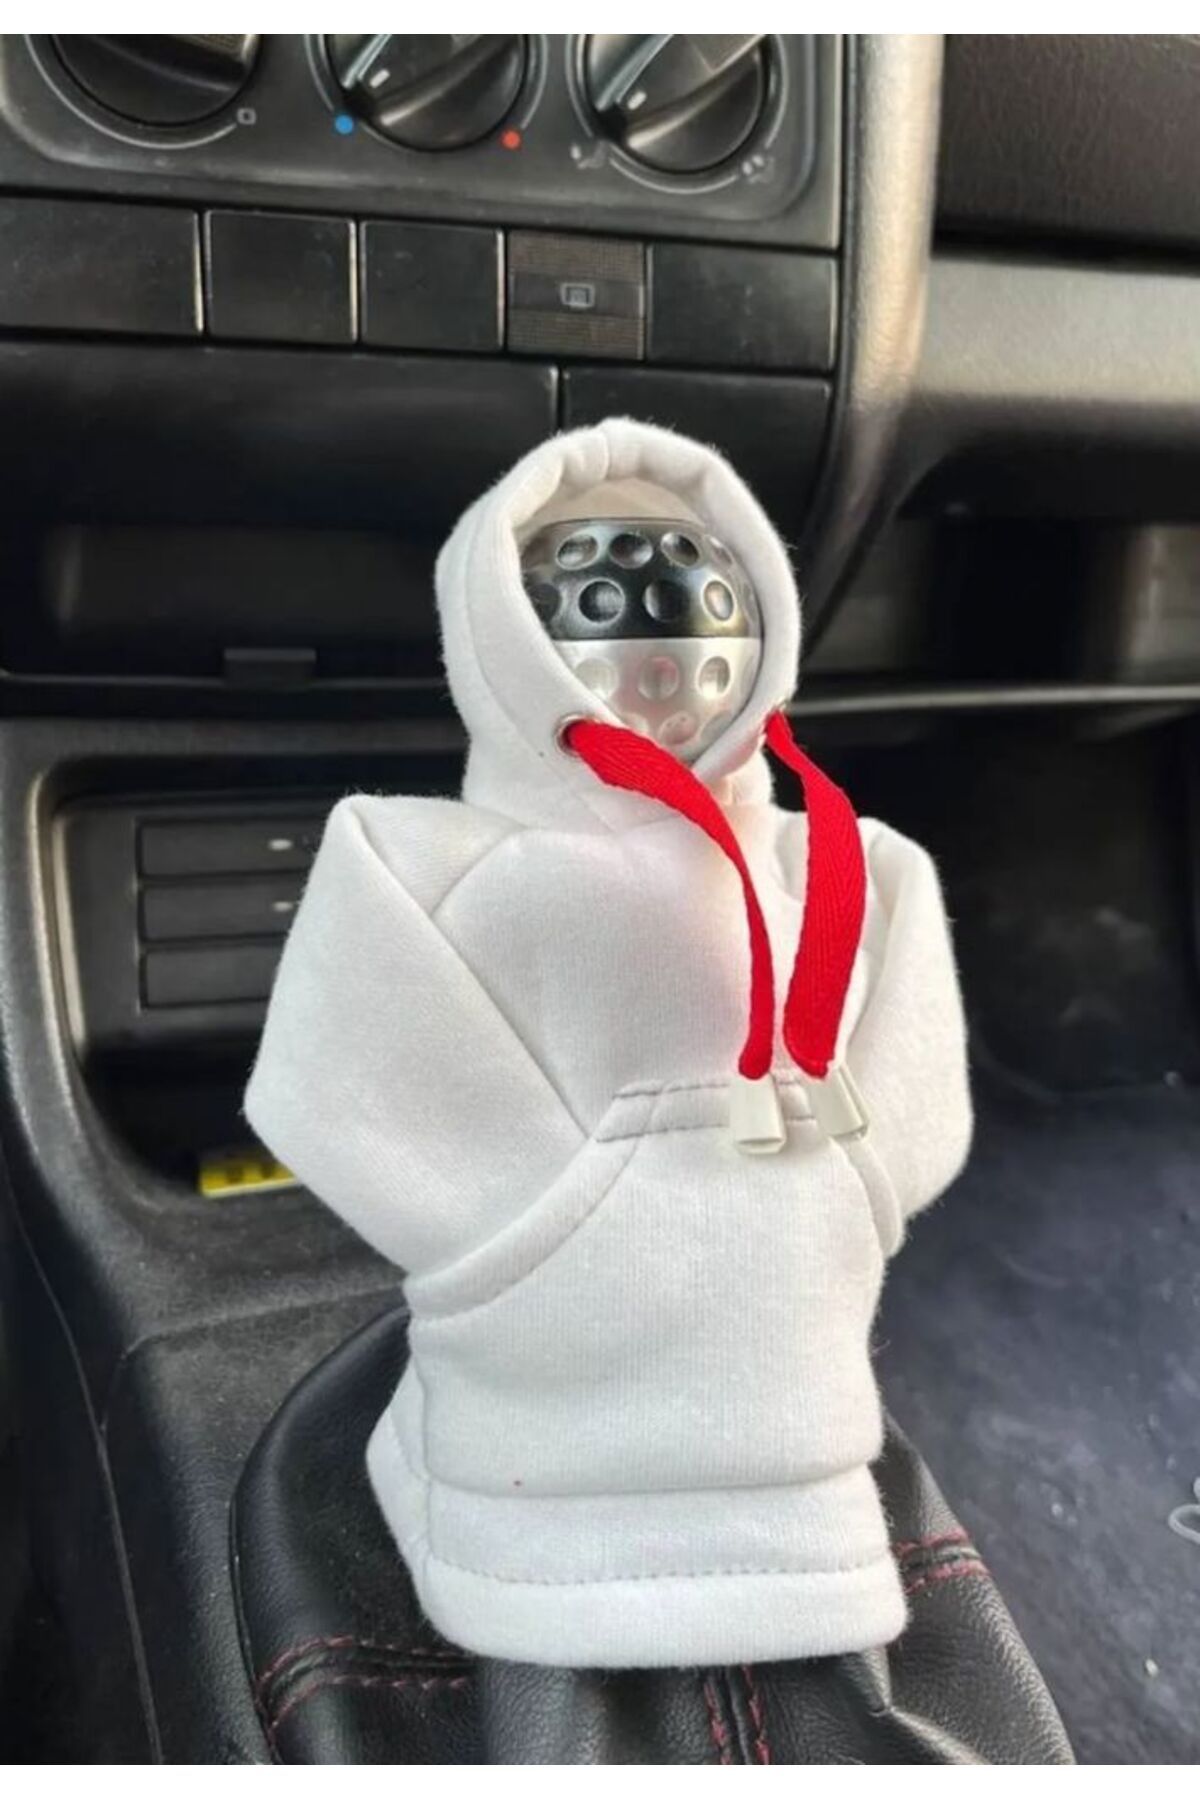 EFGARAGE White Gear Shift Hoodie - Gear Shift Clothing - Gear Shift Fleece  - Gear Shift Hoodie Compatible with All Vehicles - Trendyol